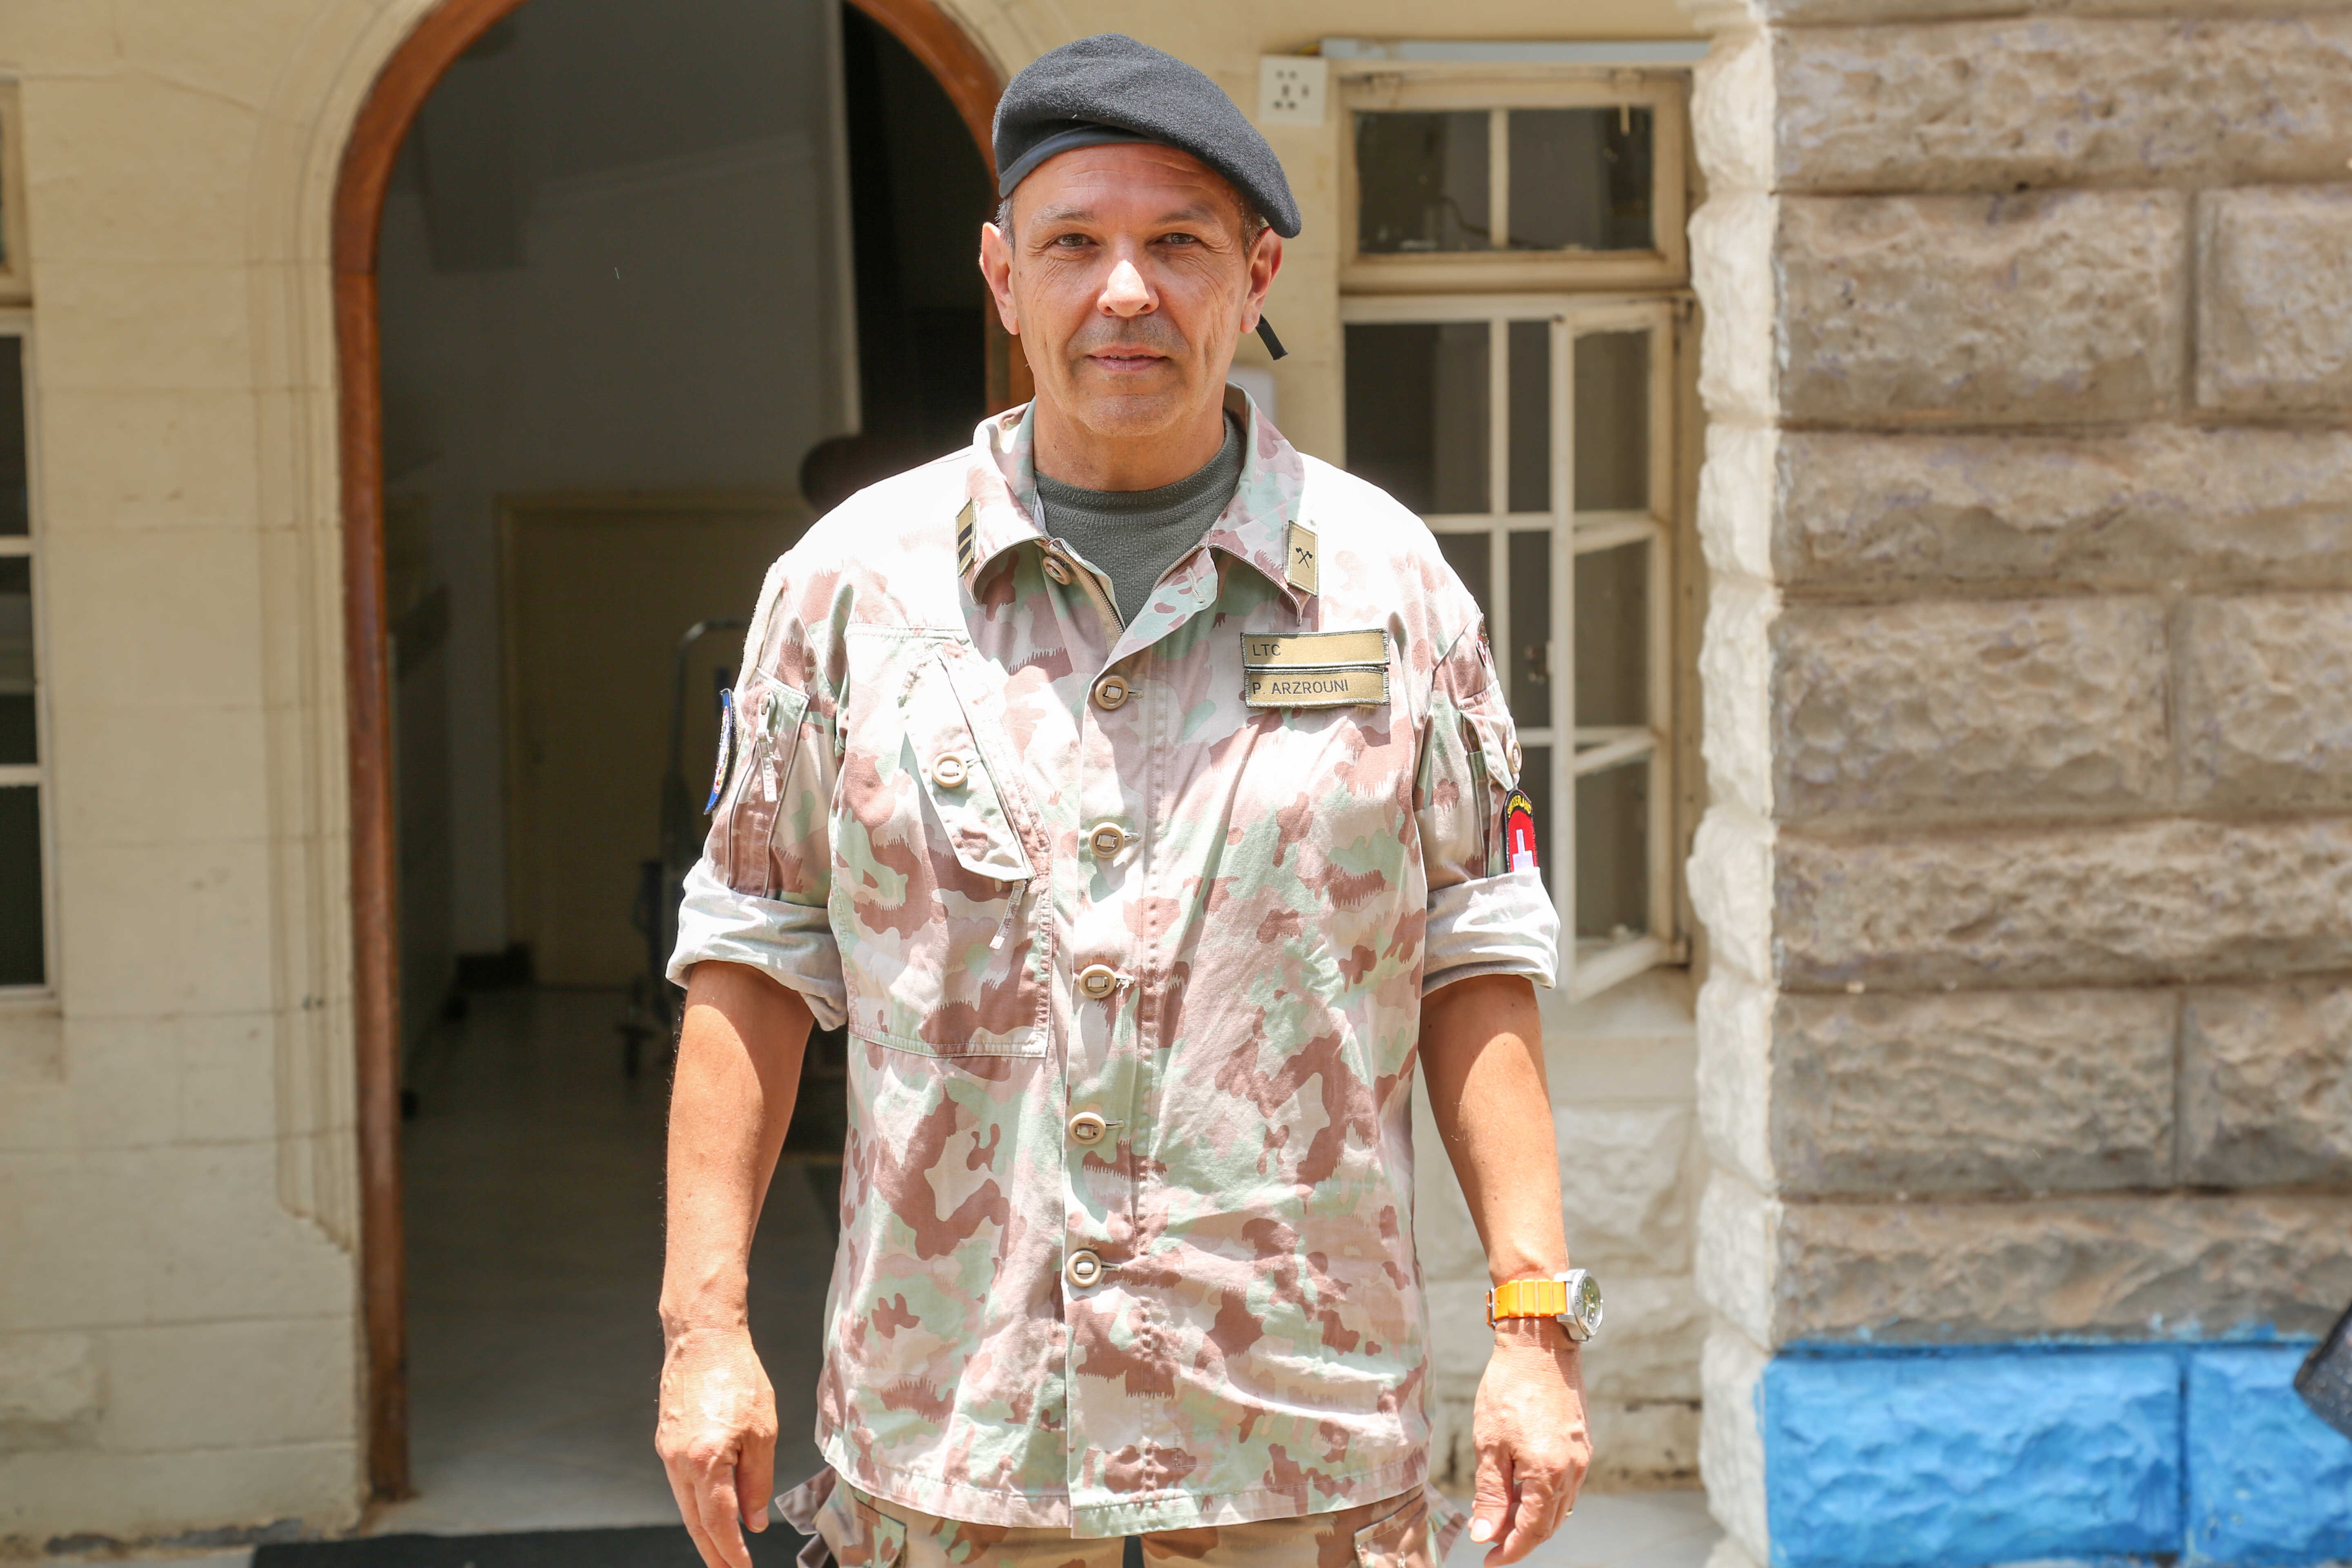 NEW HEAD OF TRAINING ASSUMES OFFICE AT THE PEACE AND CONFLICT STUDIES SCHOOL